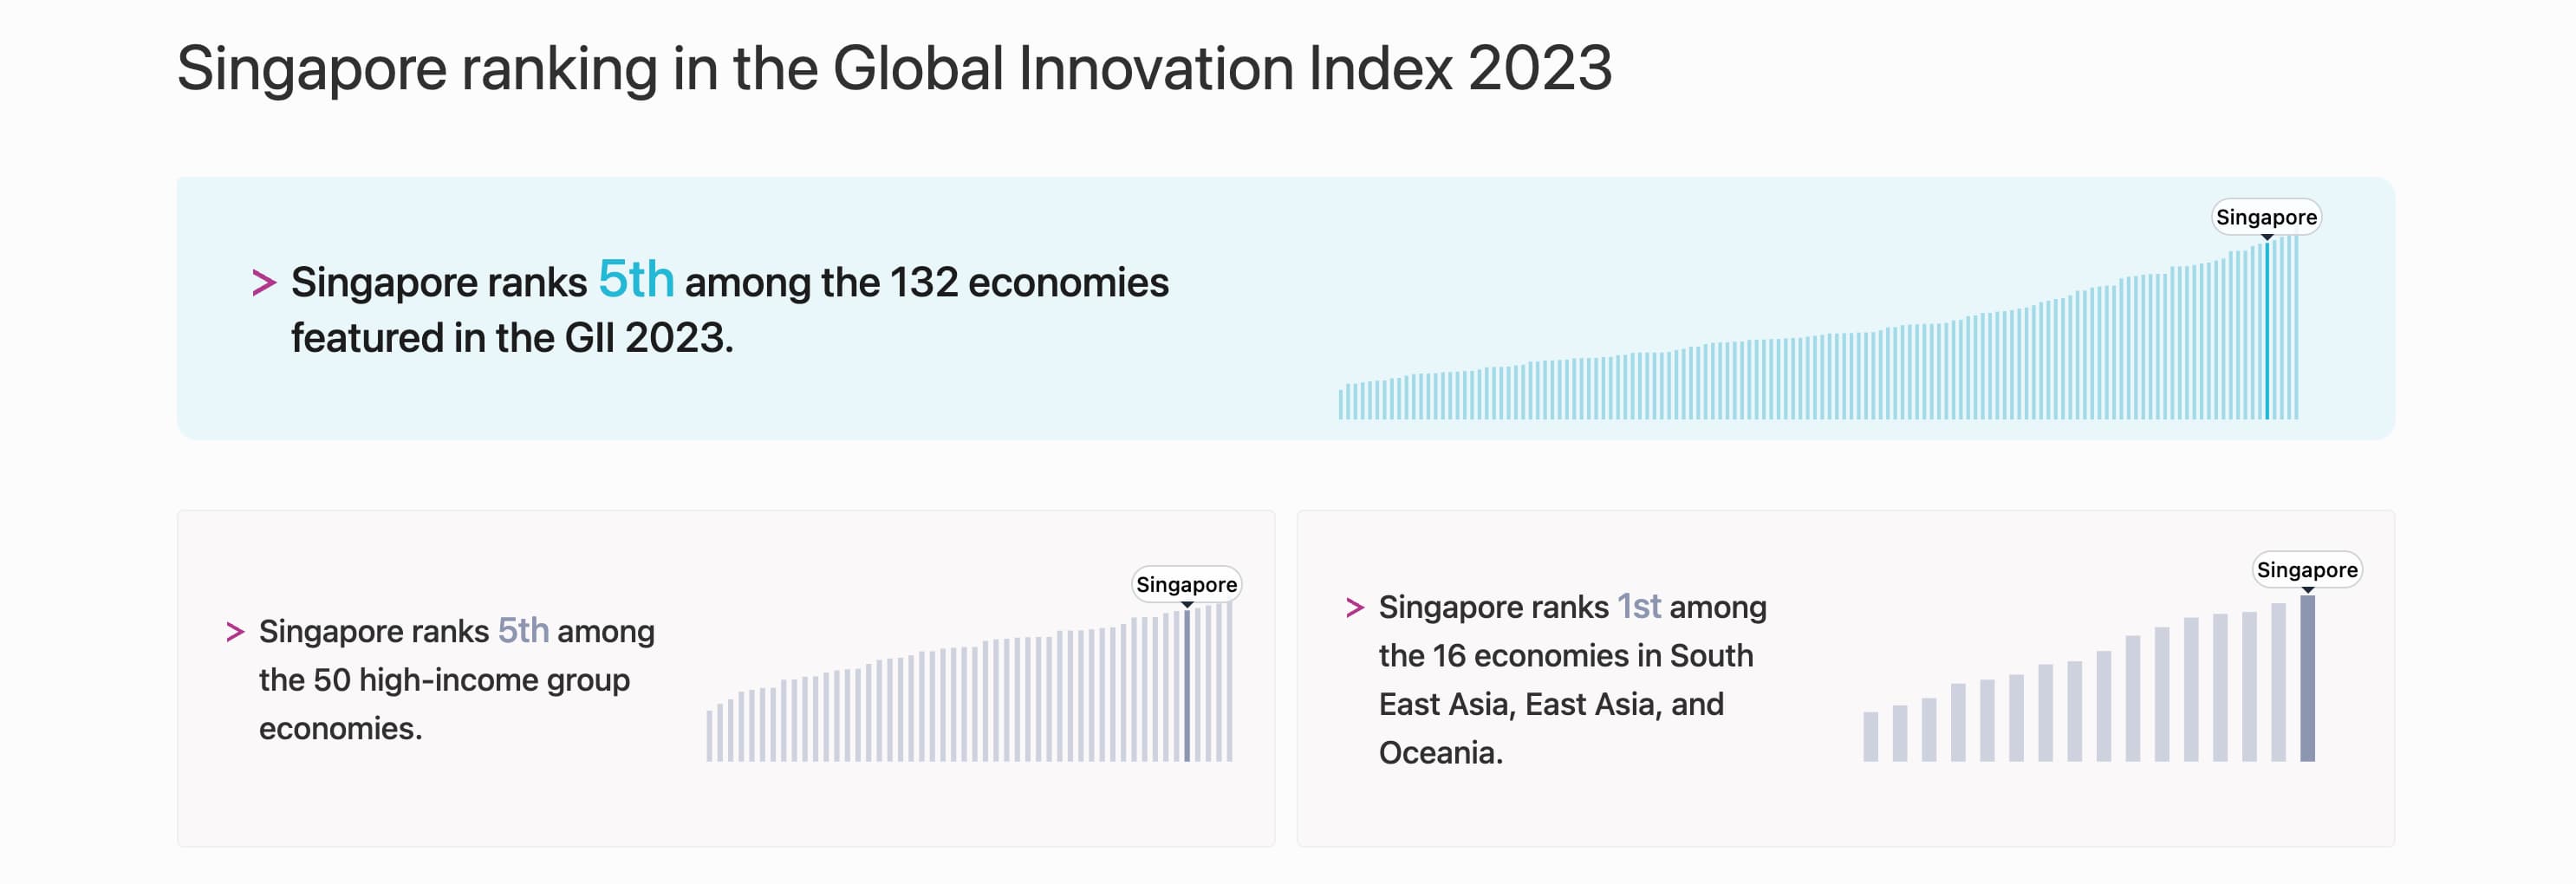 Singapore's ranking in the Global Innovation Index 2023